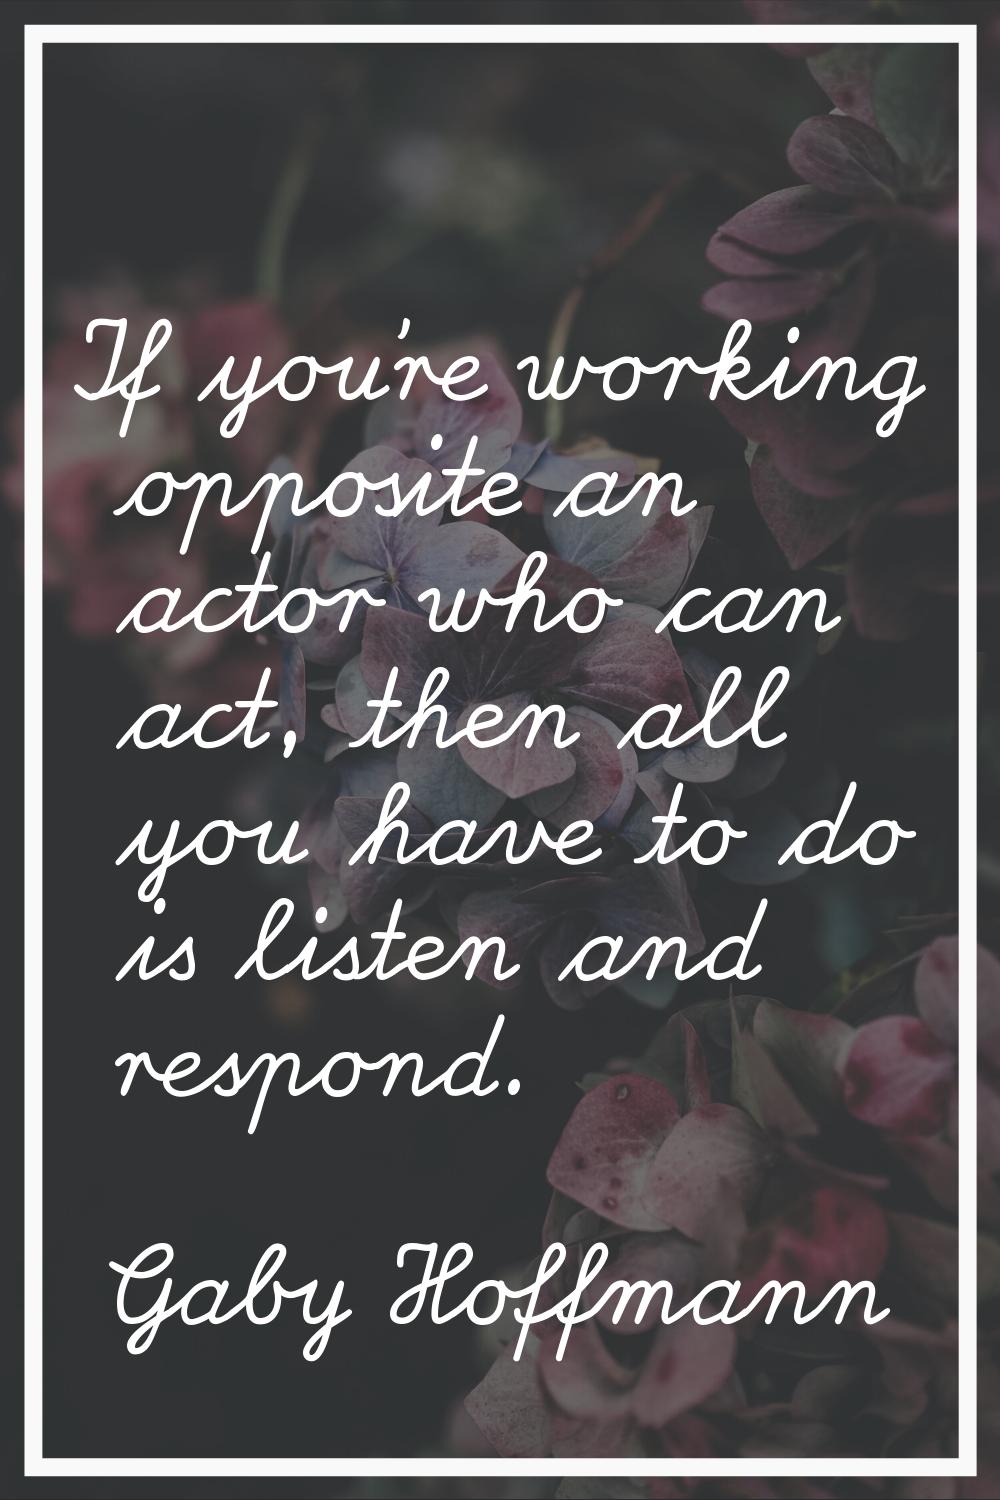 If you're working opposite an actor who can act, then all you have to do is listen and respond.